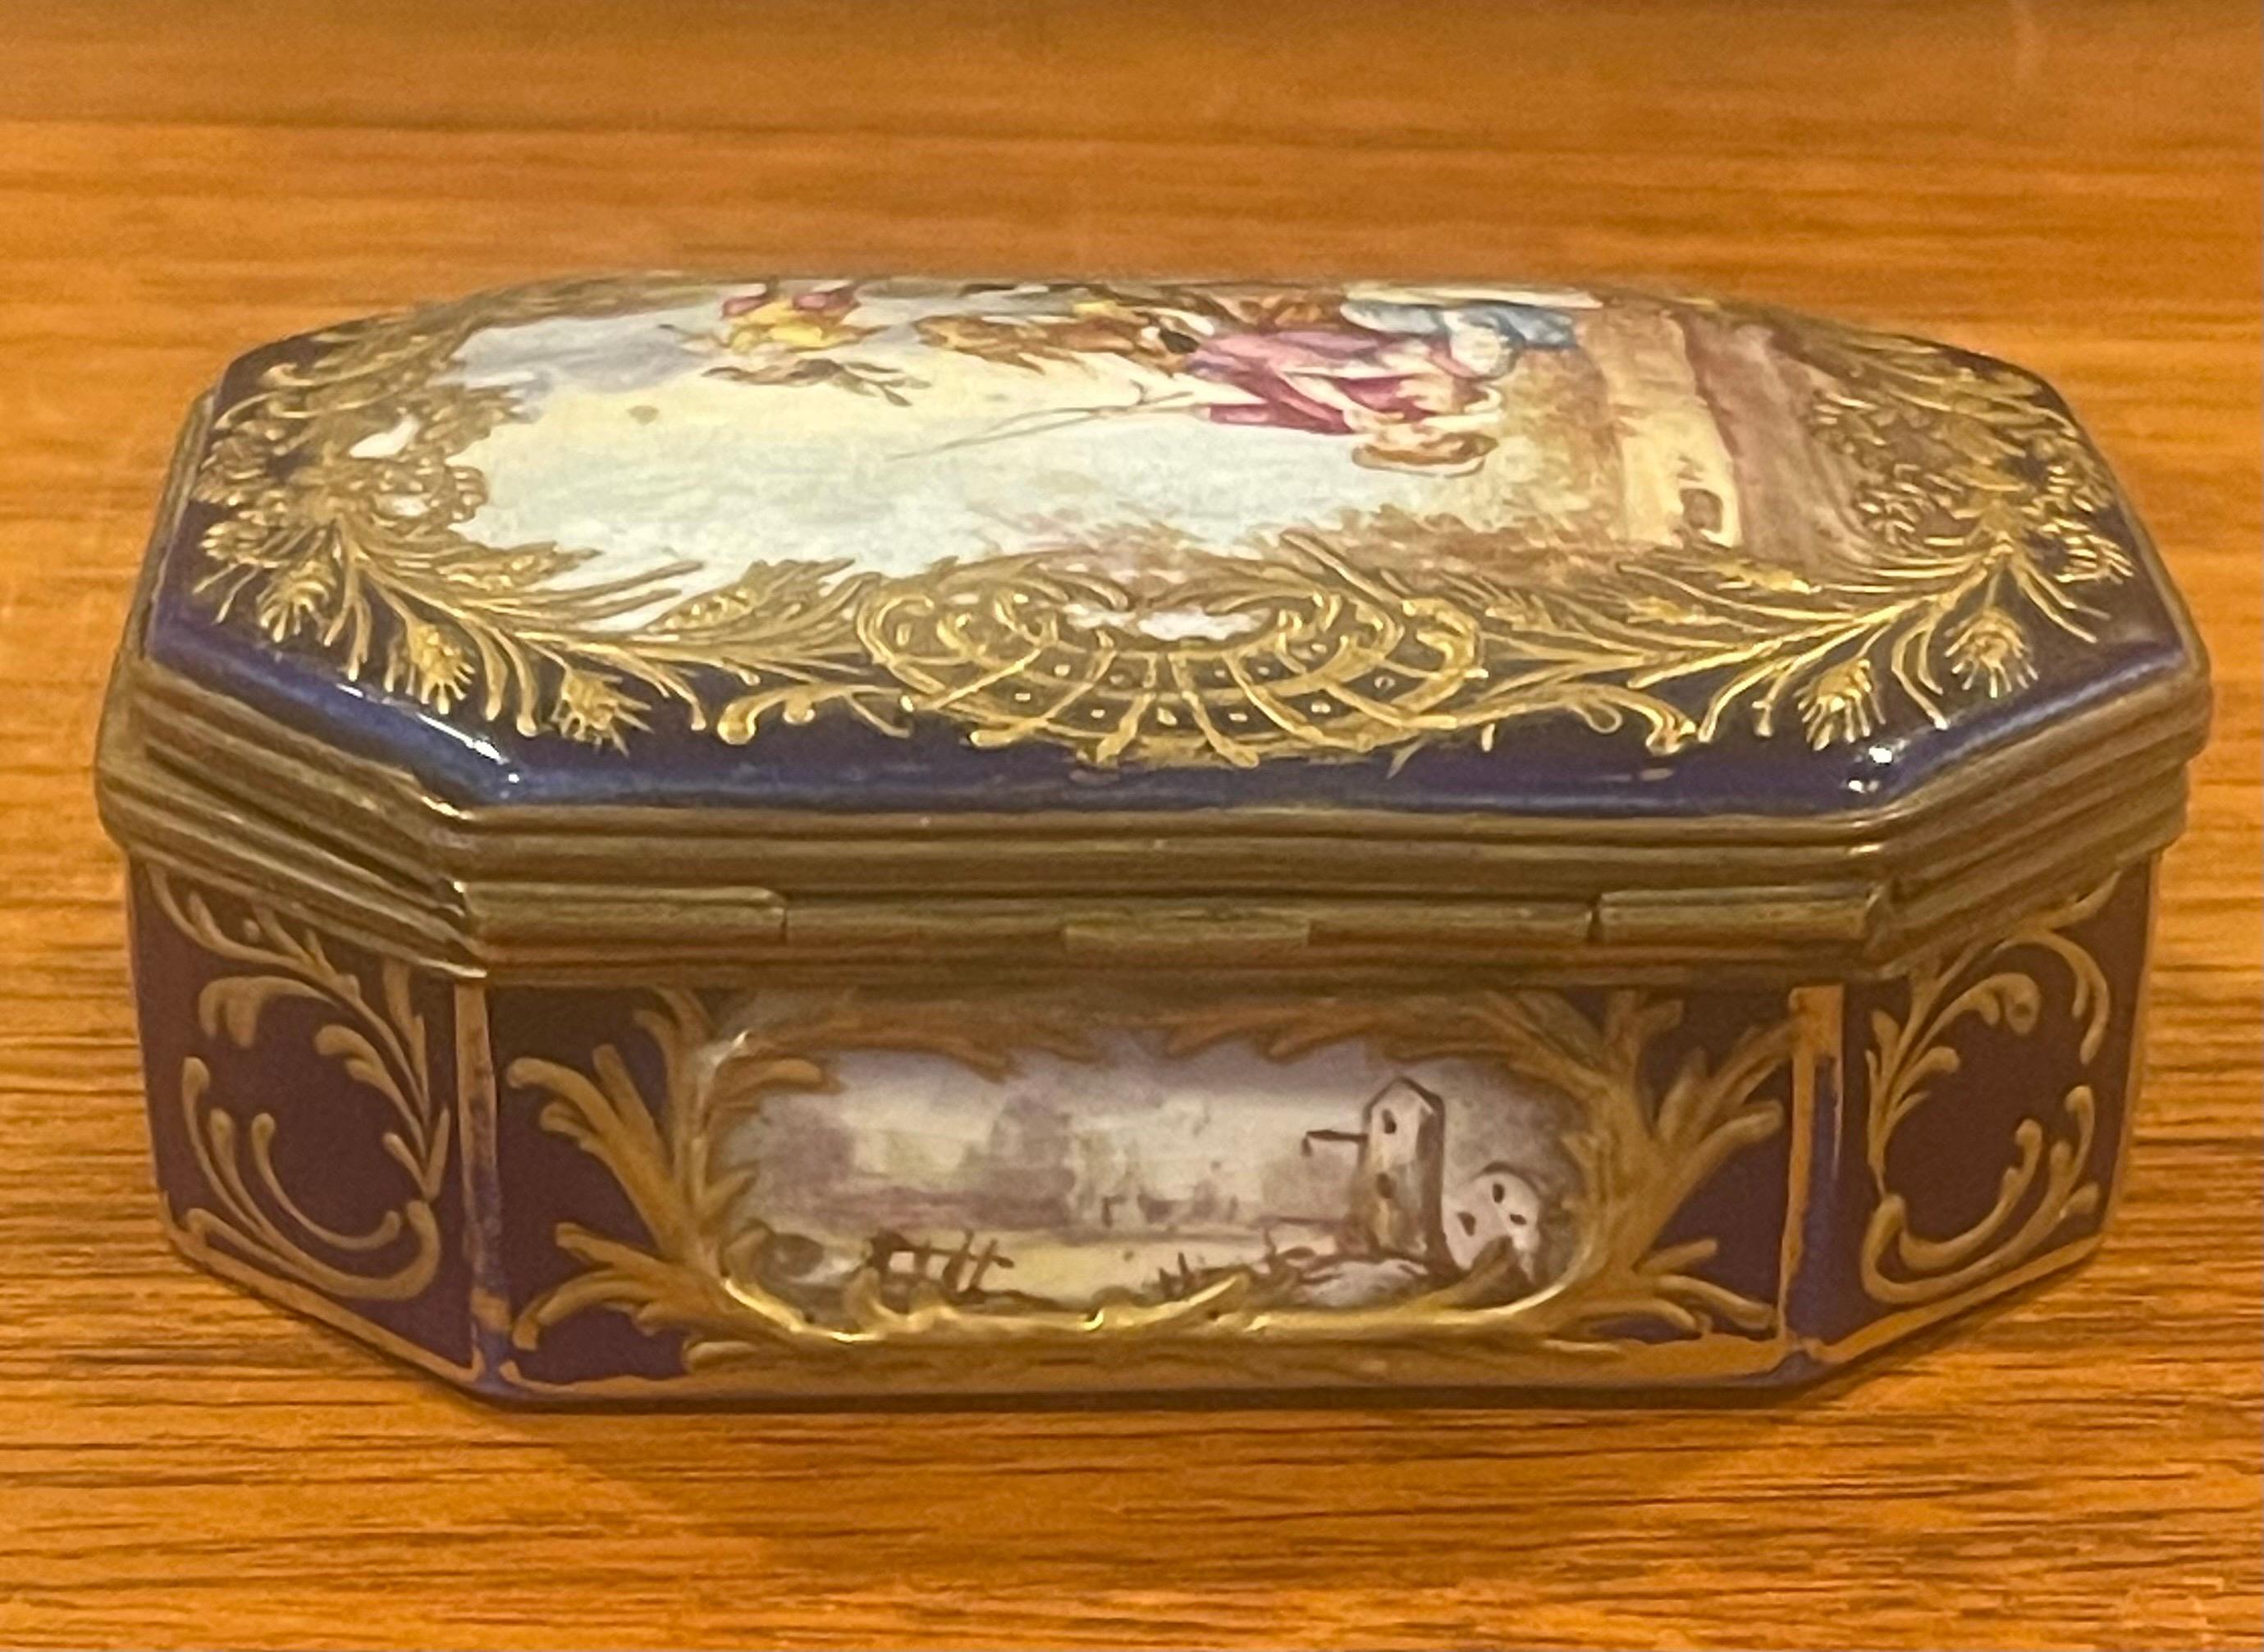 Porcelain 18th Century Victorian Enamel and Ormulu Lidded Box by Sevres